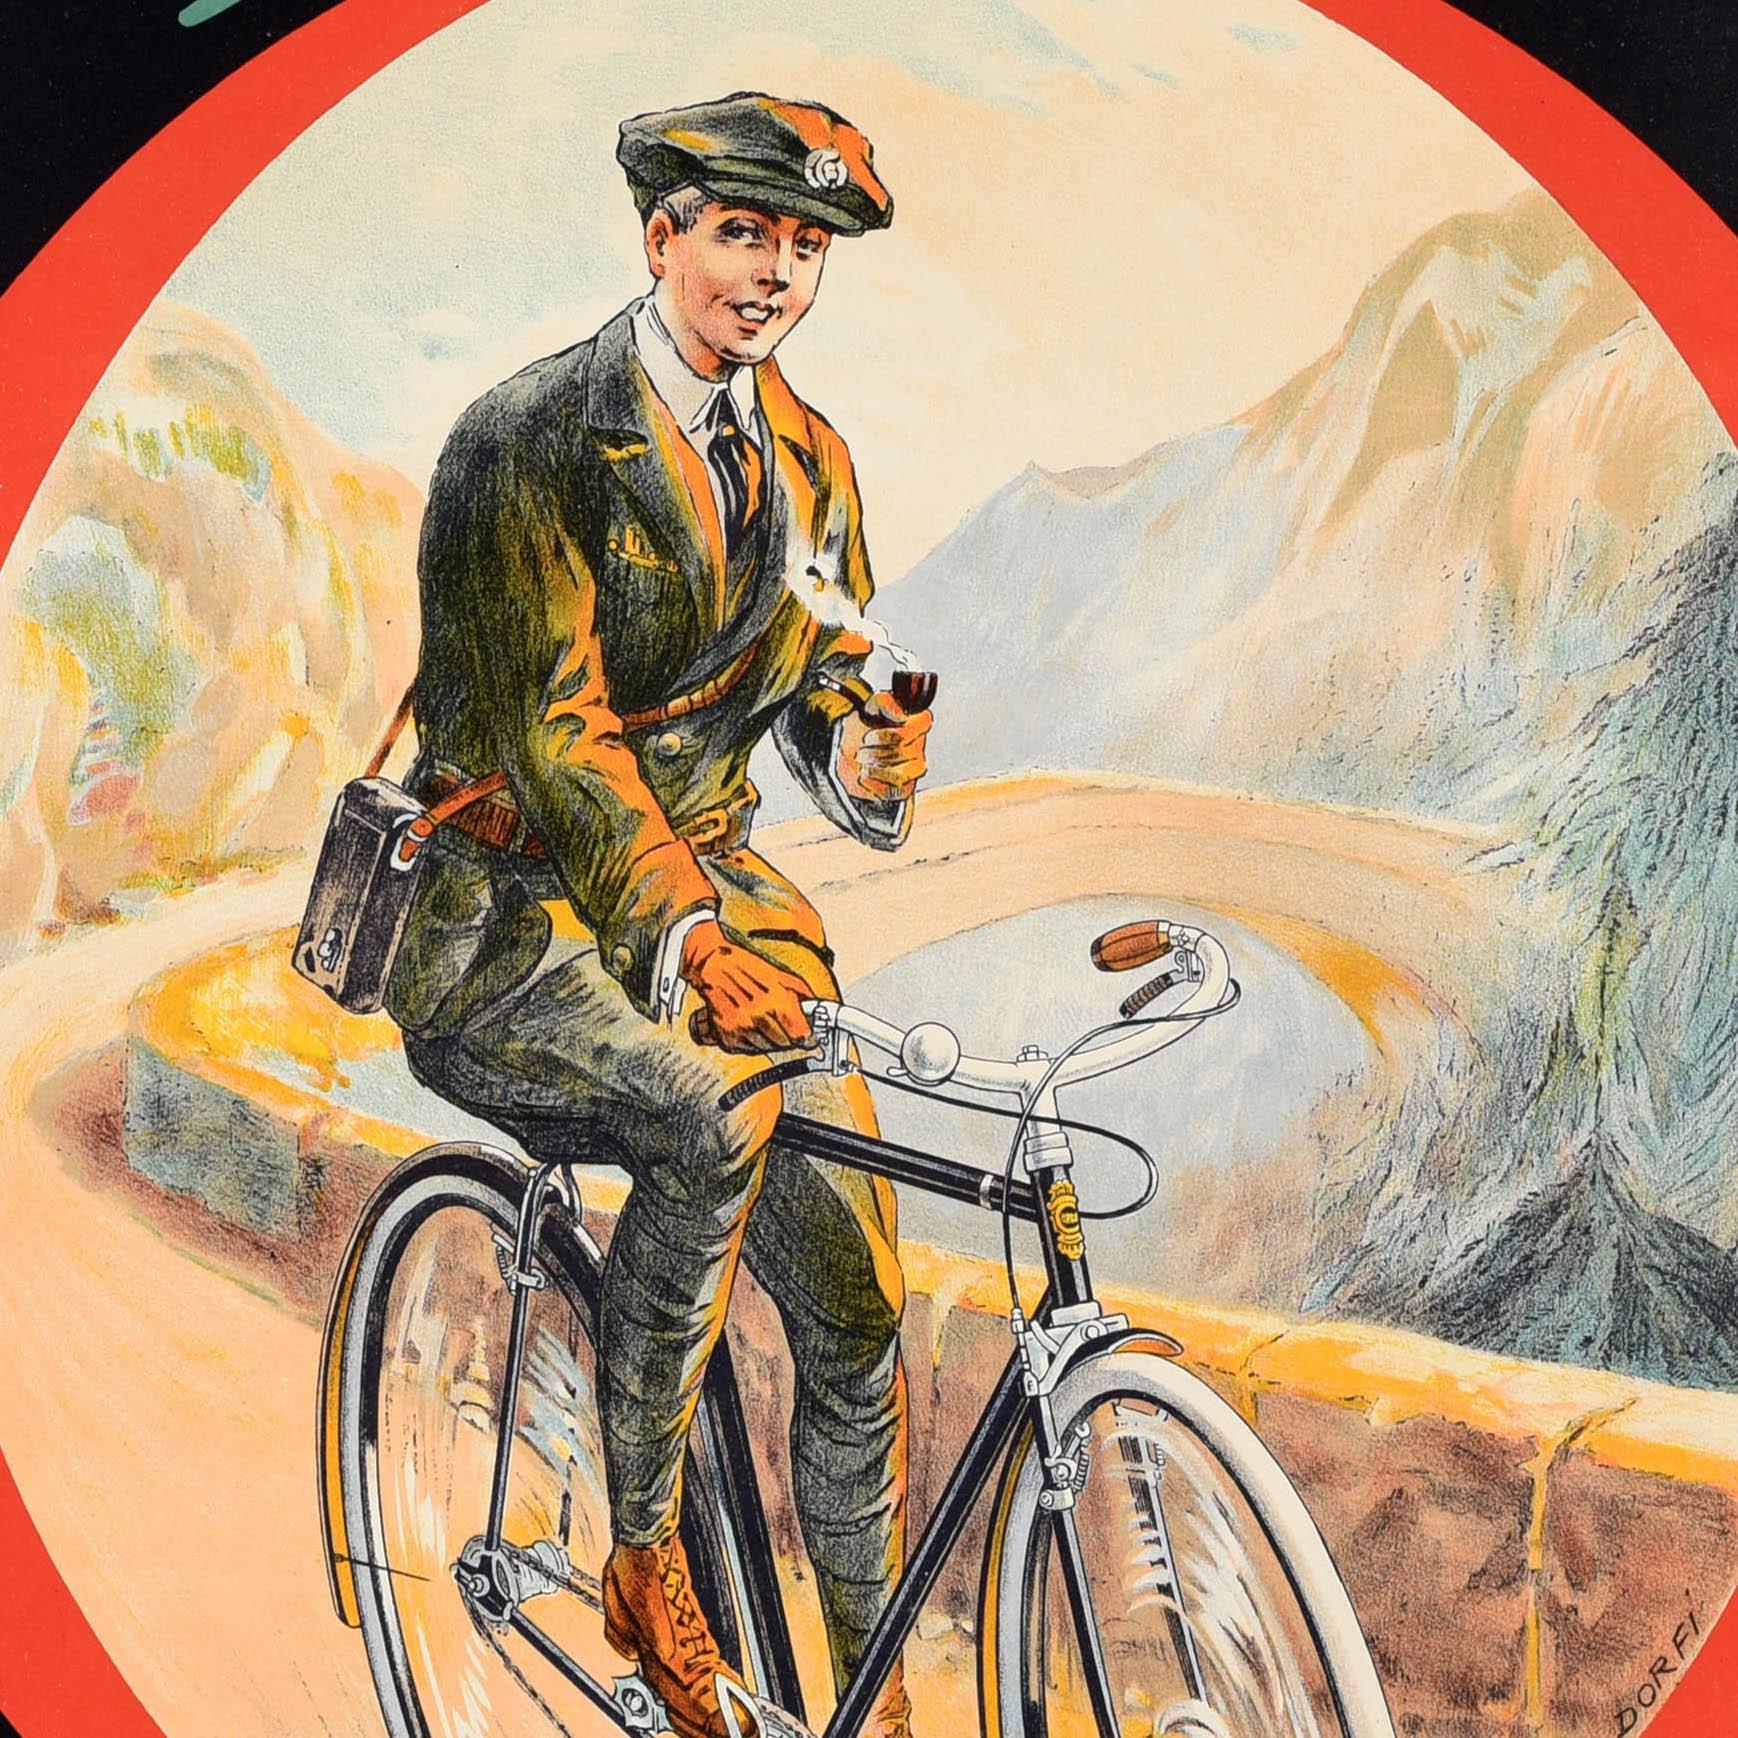 Original vintage bike advertising poster for Omega Cycles featuring scenic artwork by Dorfi (Albert Dorfinant; 1881-1976) depicting a man smoking a pipe and riding a bicycle along a Hillside road in front of trees and mountains with a bridge over